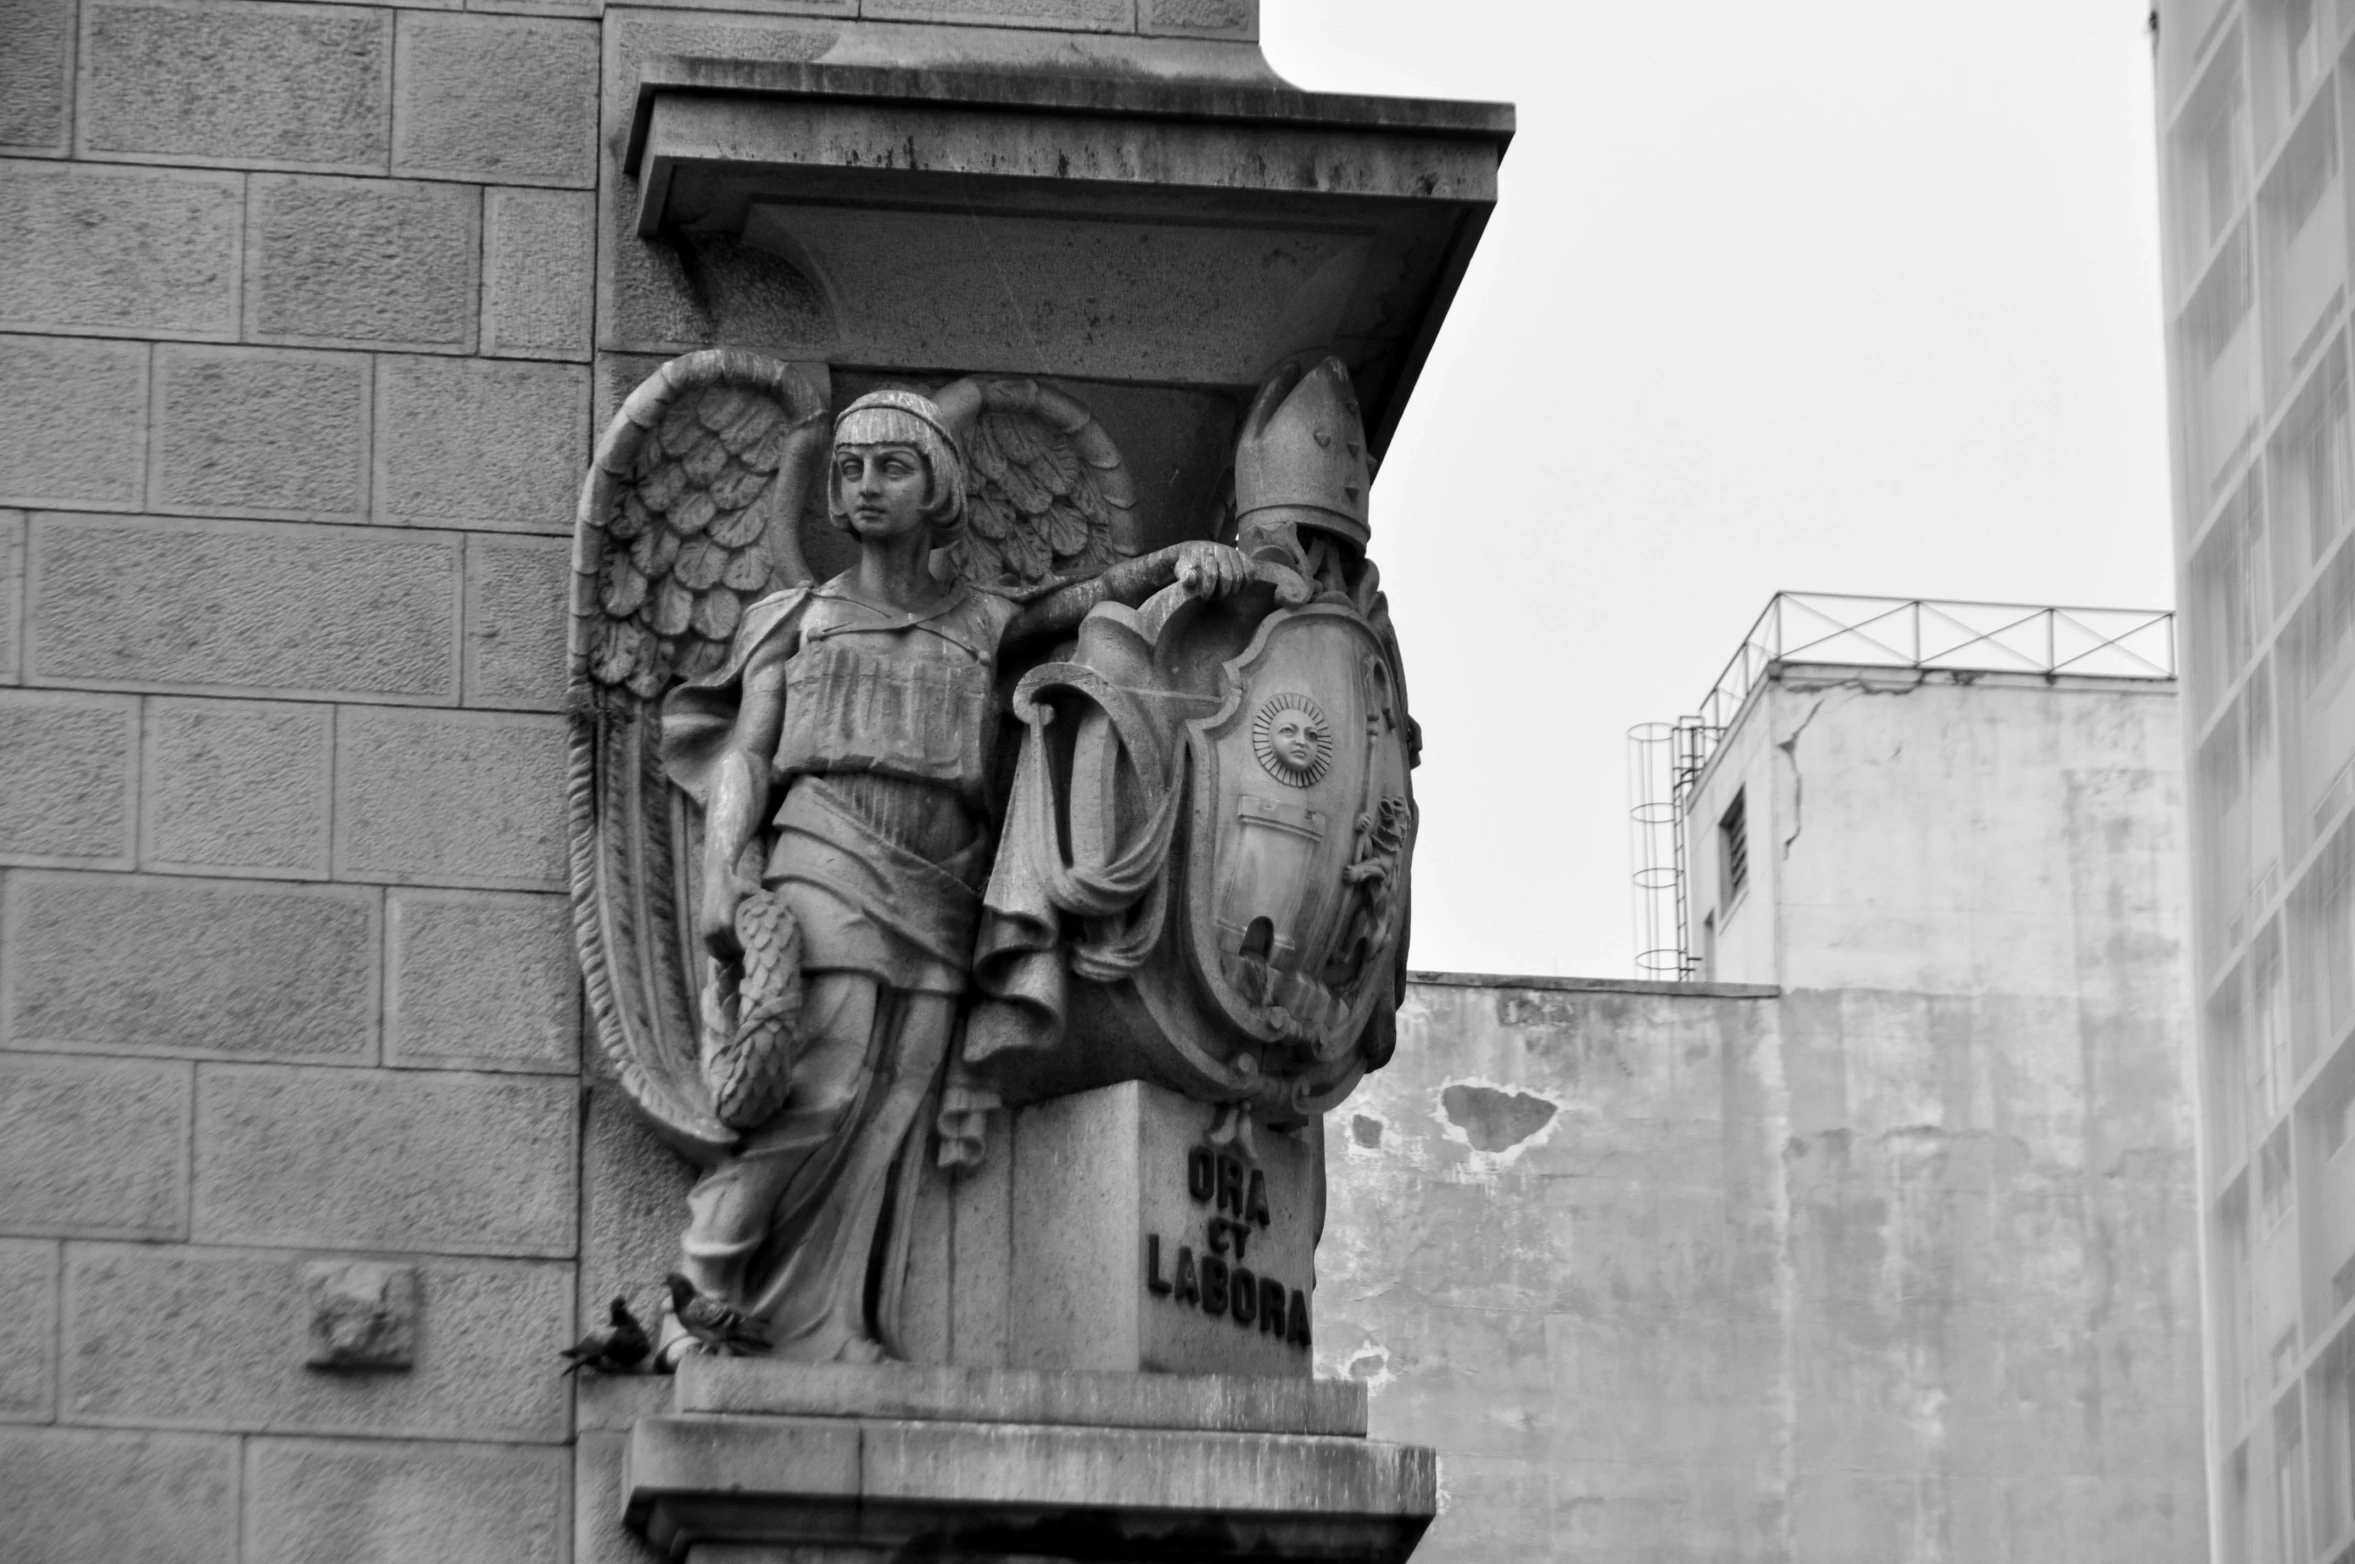 a stone gargoyle with two wings stands next to an urban building